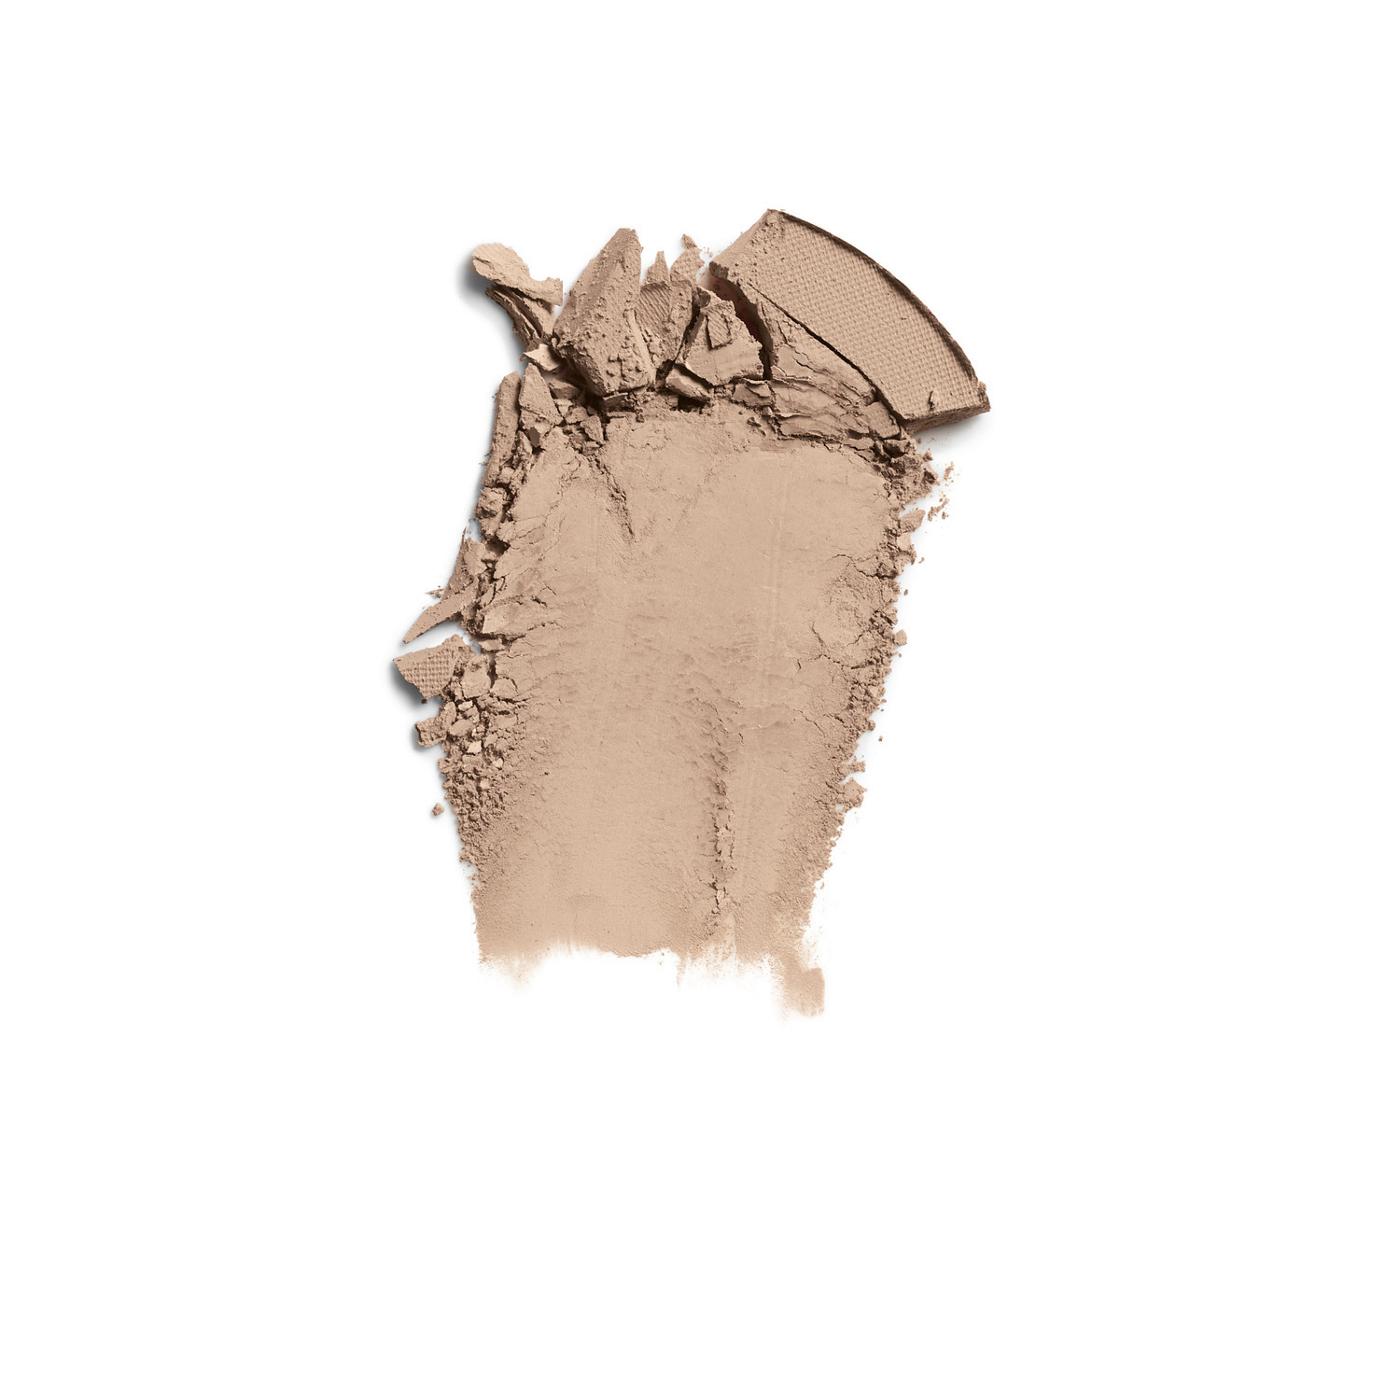 Covergirl Clean Pressed Powder 130 Classic Beige; image 3 of 4